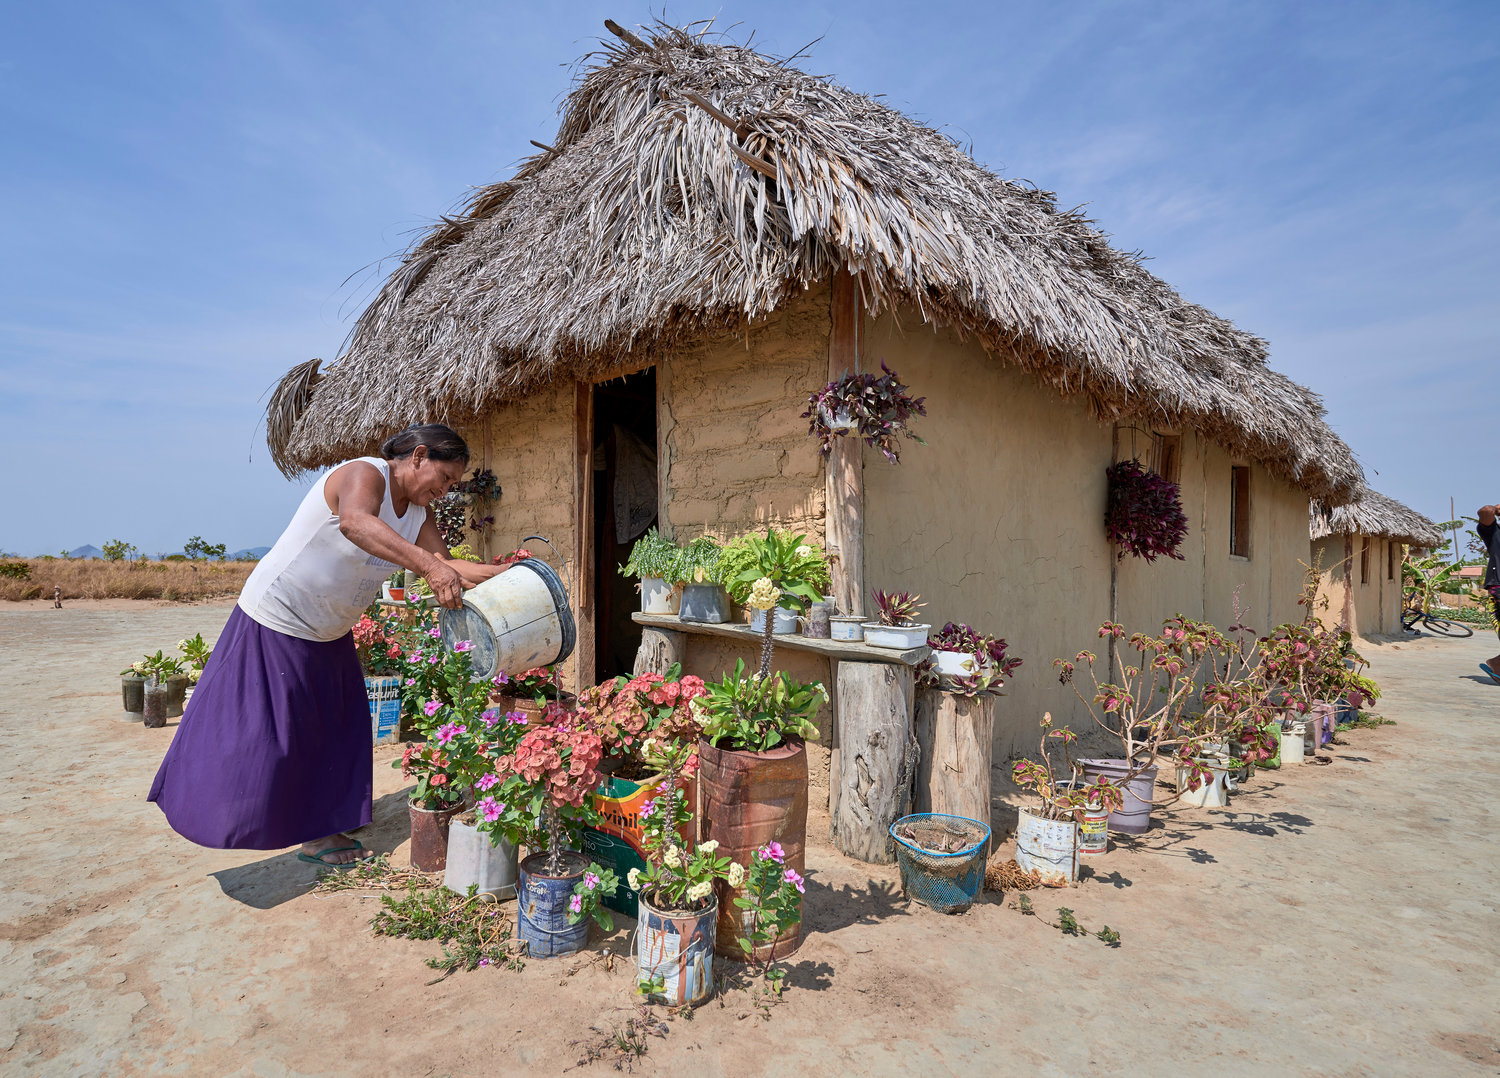 Celestina Fernandes da Silva, a Catholic activist, waters flowers in front of her home in the Wapishana indigenous village of Tabalascada, Brazil, April 3, 2019. Franciscan Father Joao Messias Sousa, who works among indigenous in the Amazon, said the people believe “God is in all things, but those things are not gods.”